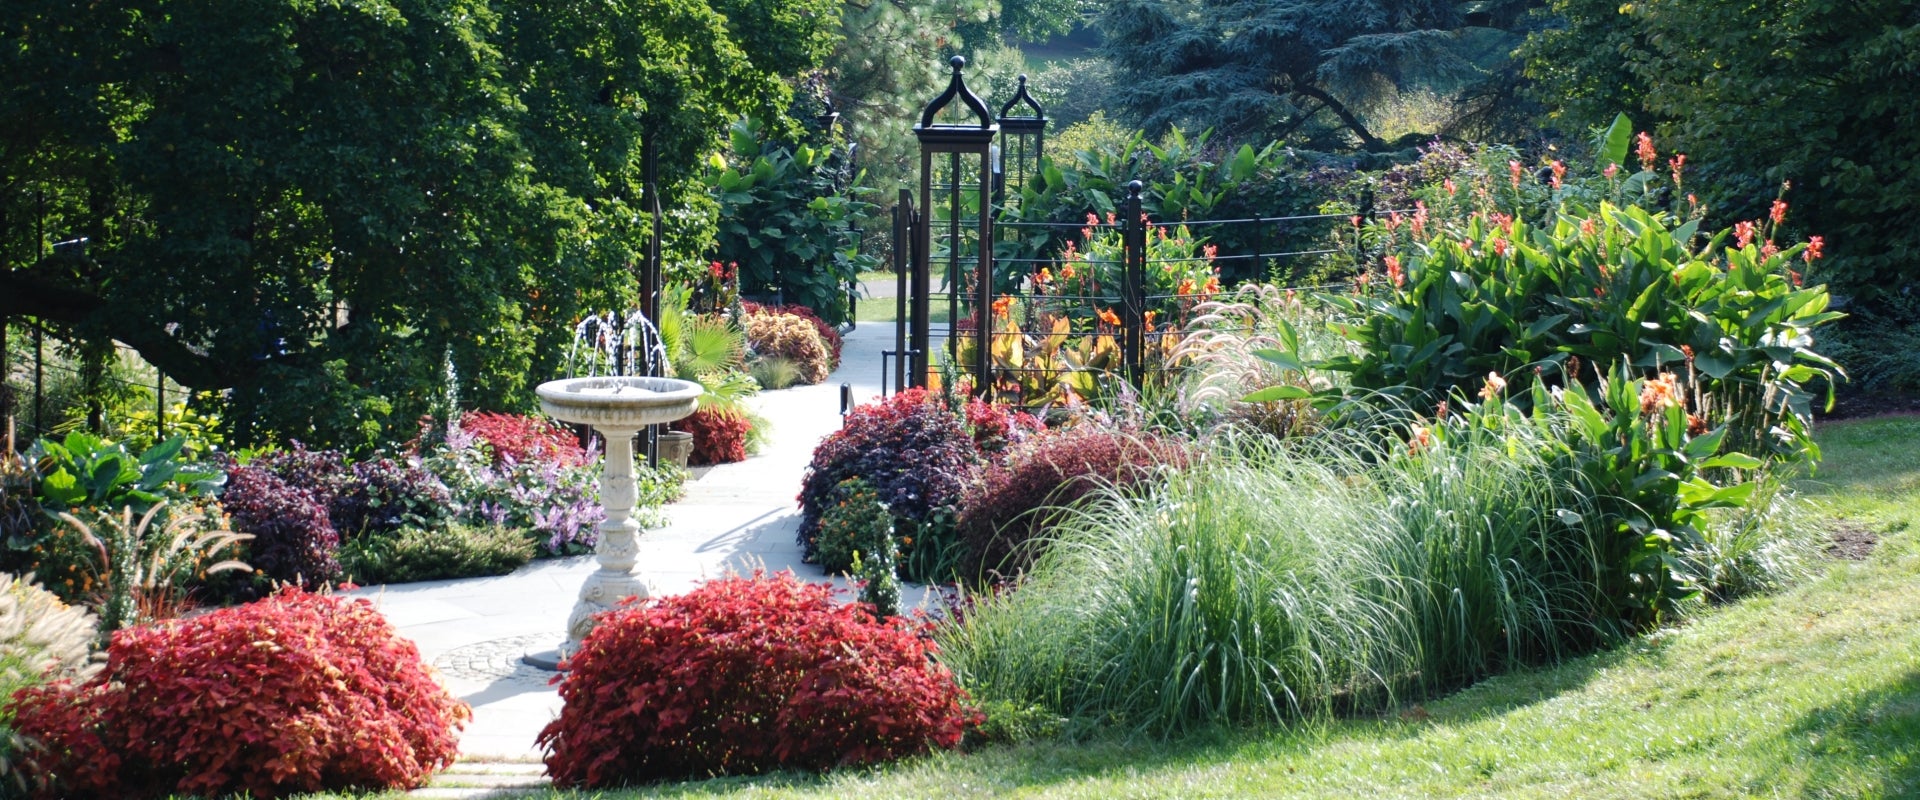 A garden filled with plants and flowers in bloom with a black wrought iron gate. 